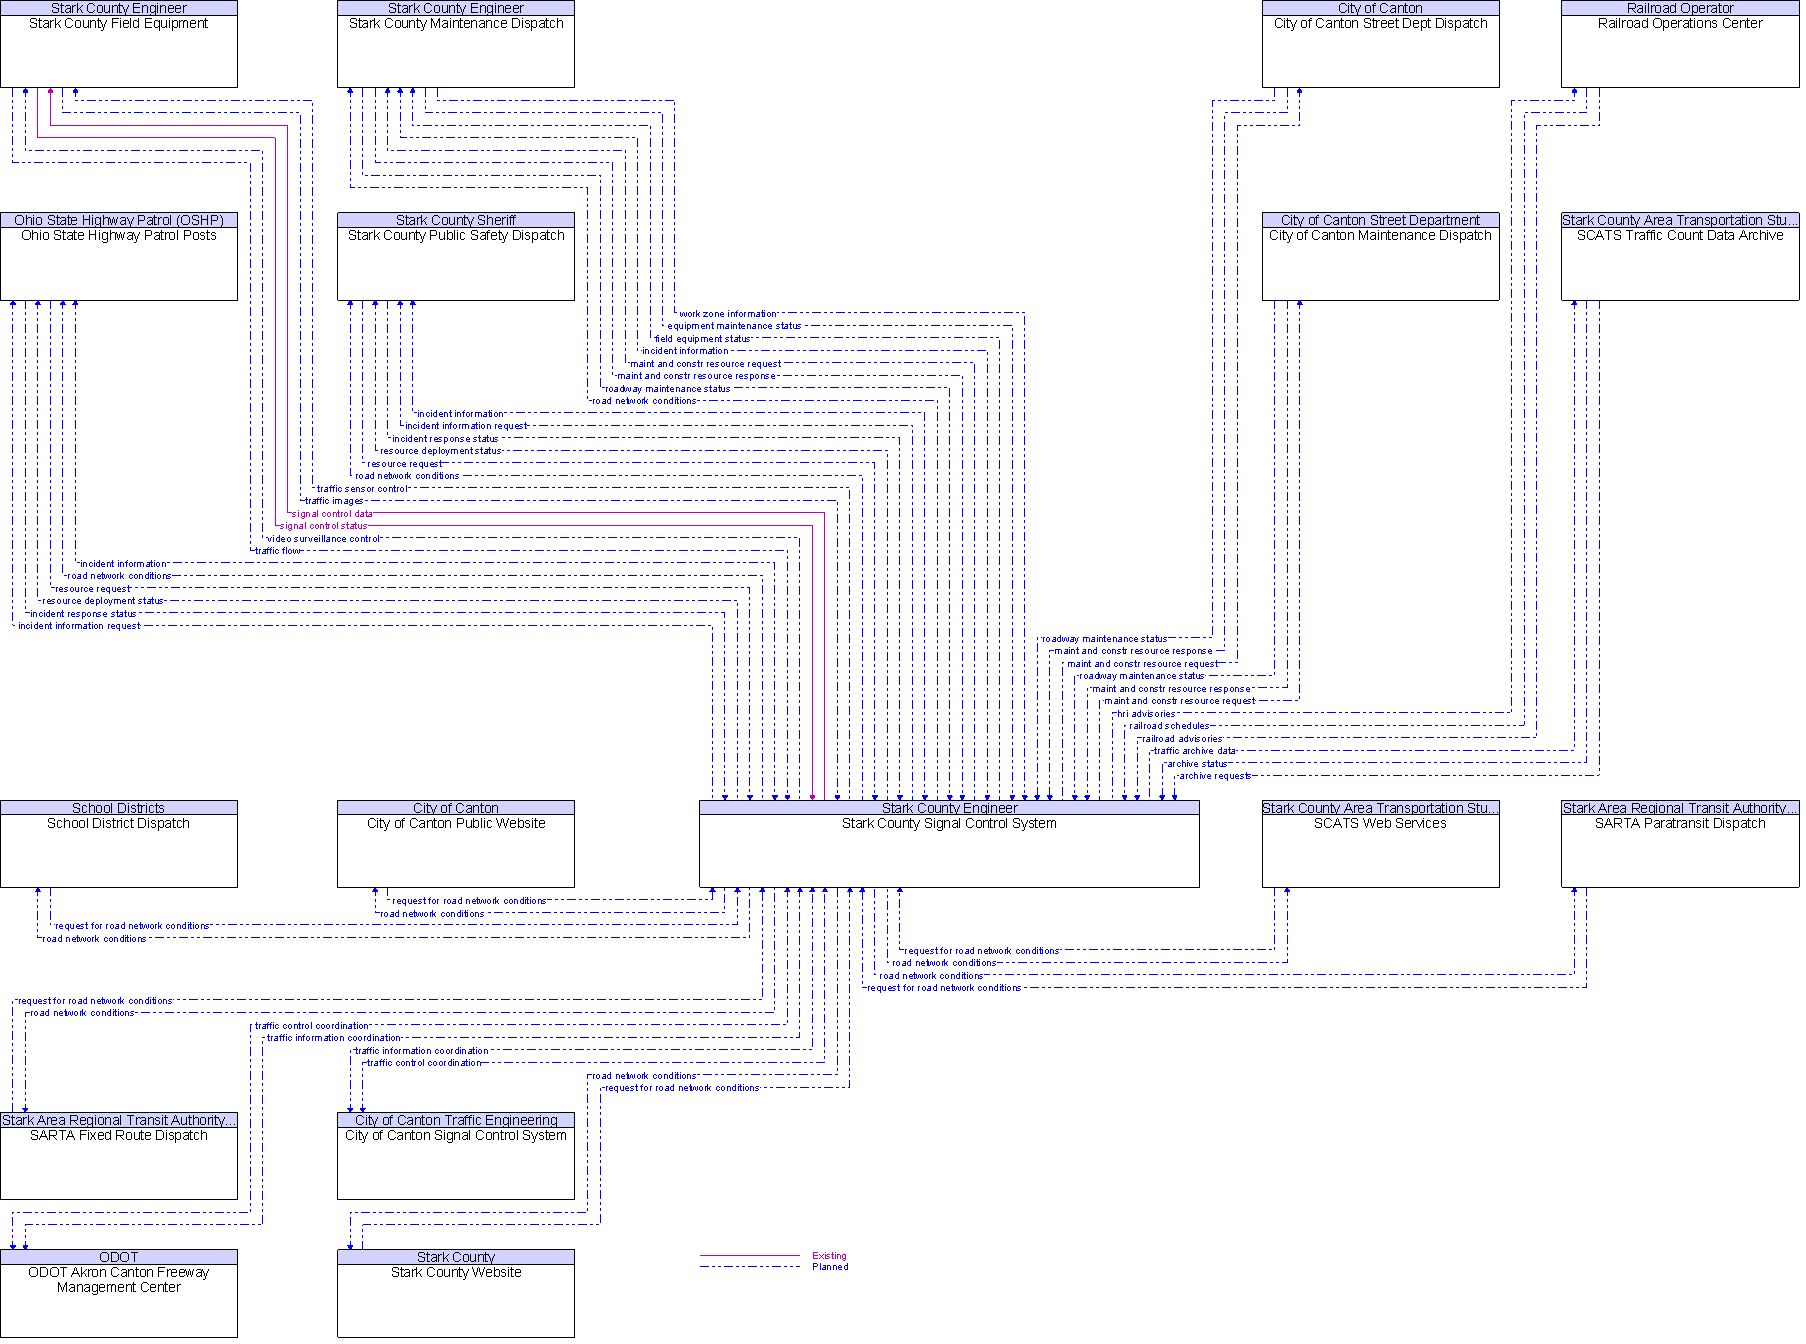 Context Diagram for Stark County Signal Control System